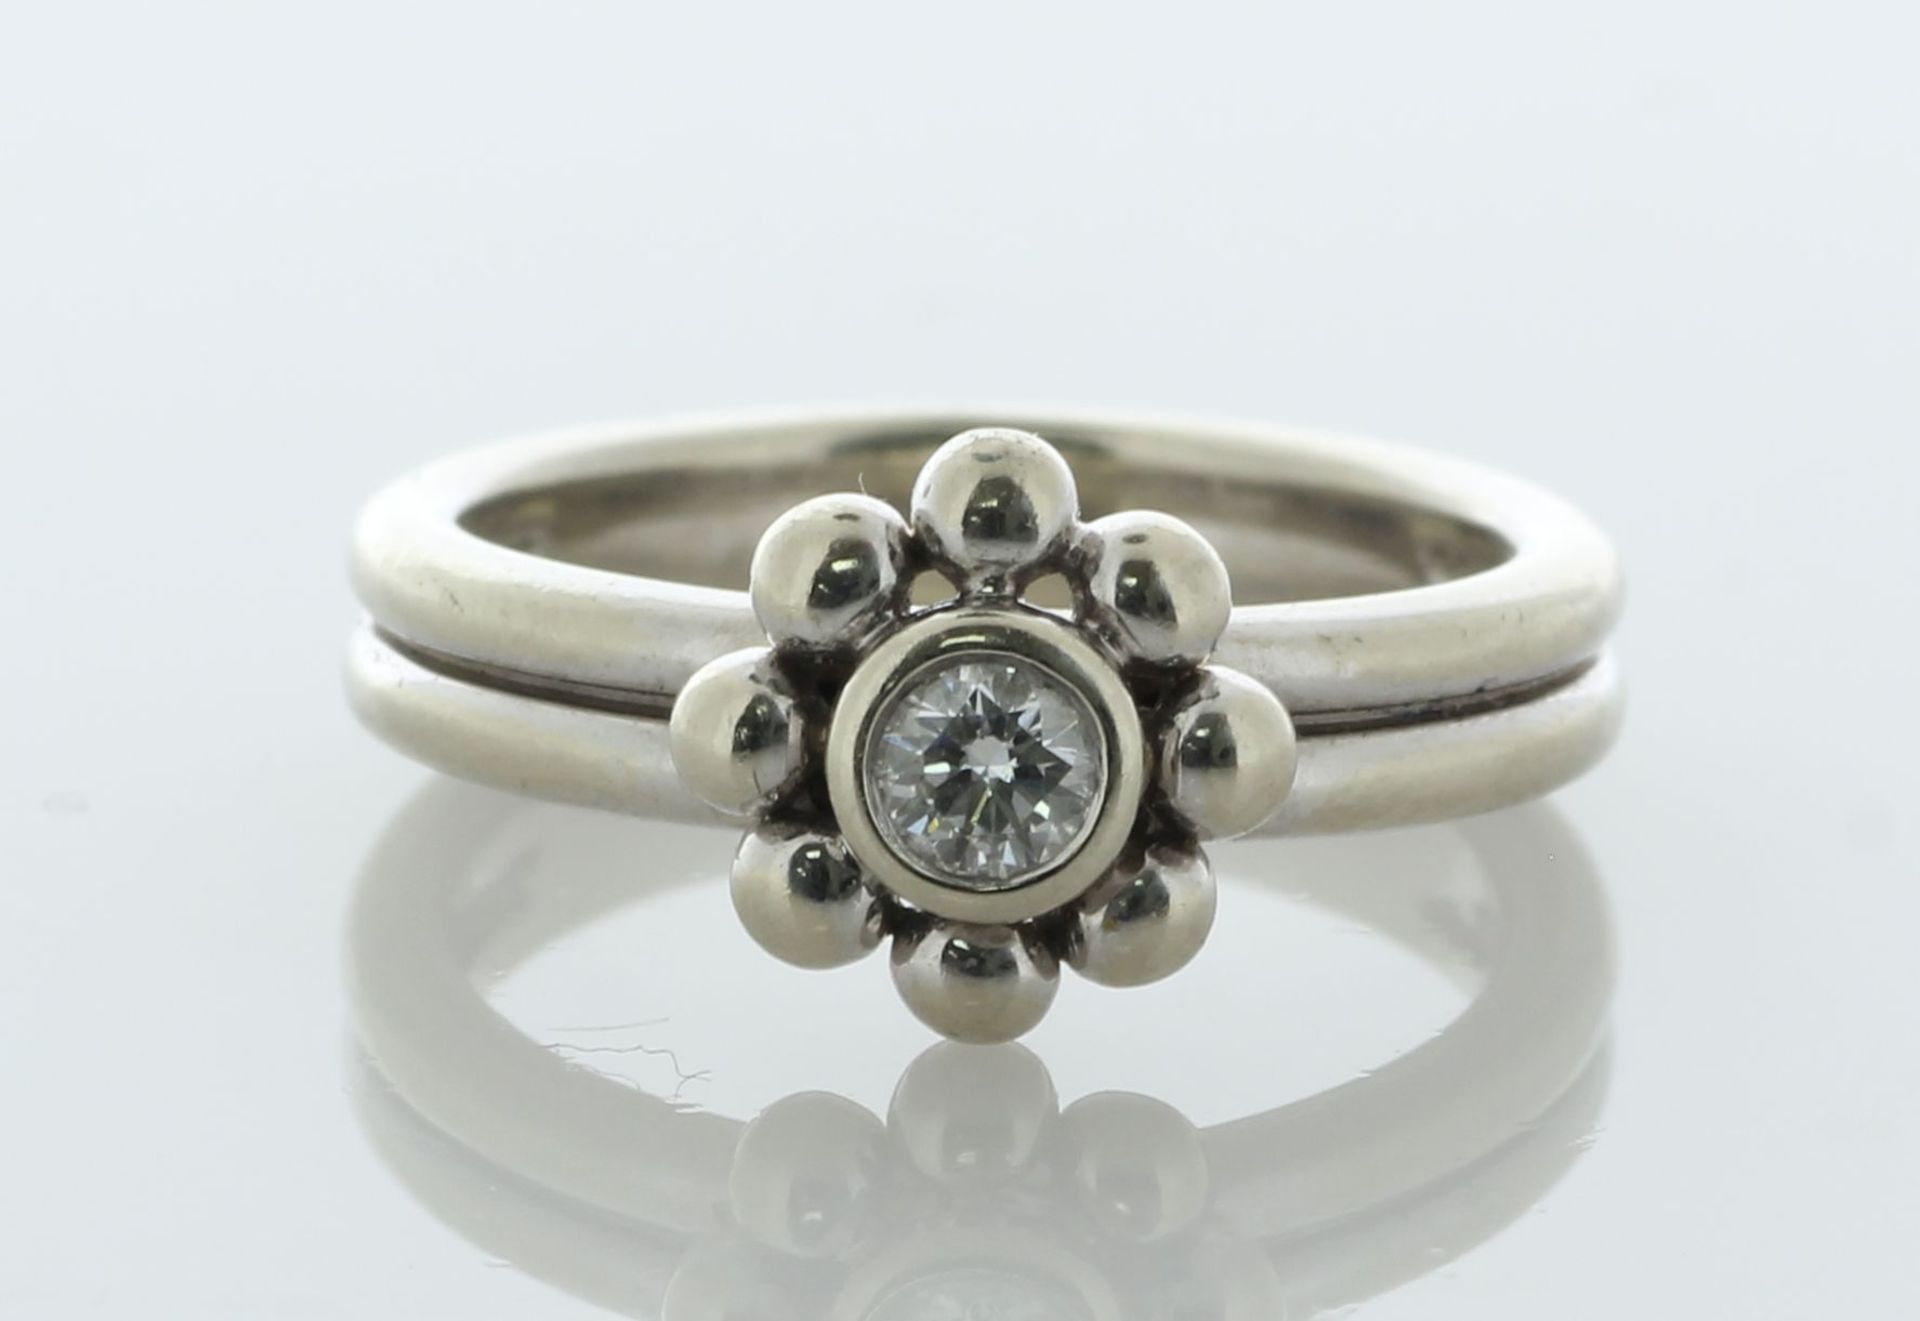 18ct White Gold Ladies Tiffany & Co Diamond Flower Ring 0.15 Carats - Valued By AGI £4,800.00 - A